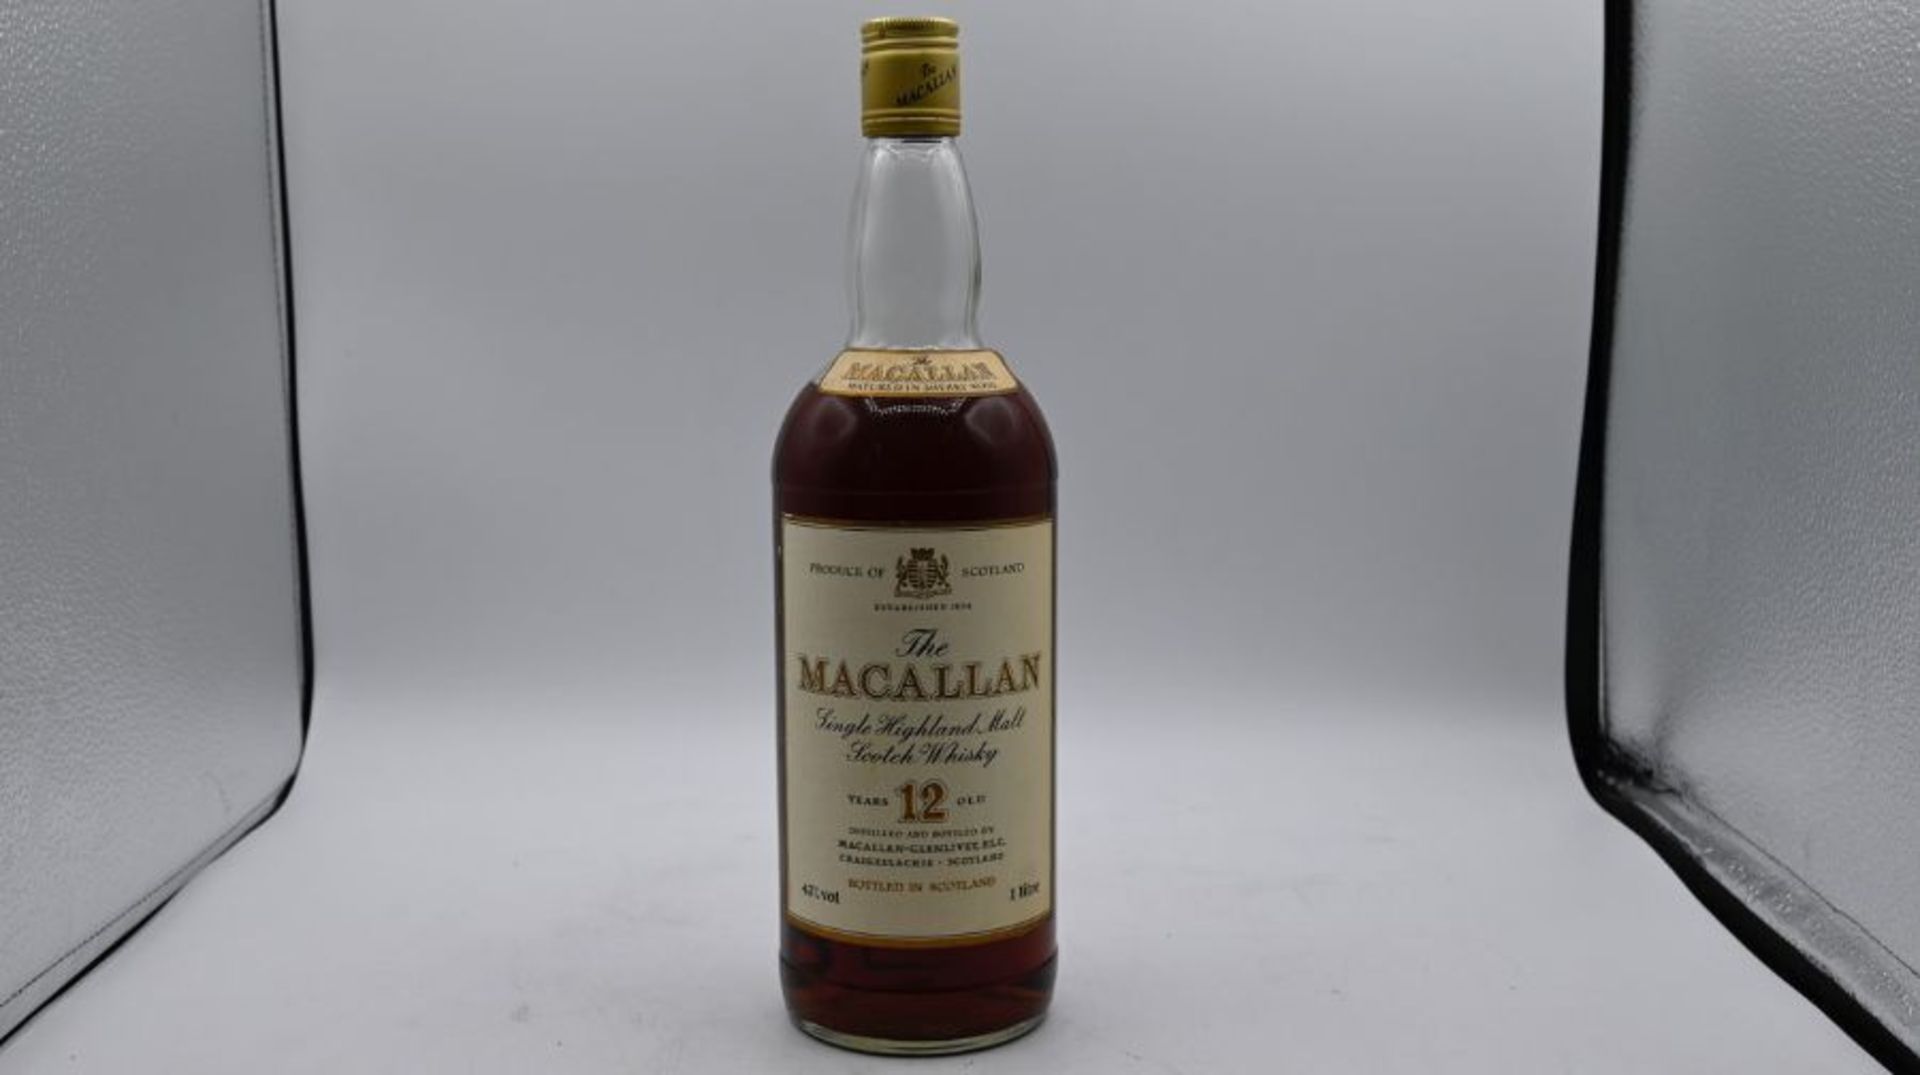 12 Year Old The Macallan Single Highland Malt Scotch Whisky 1 Litre - Image 2 of 4